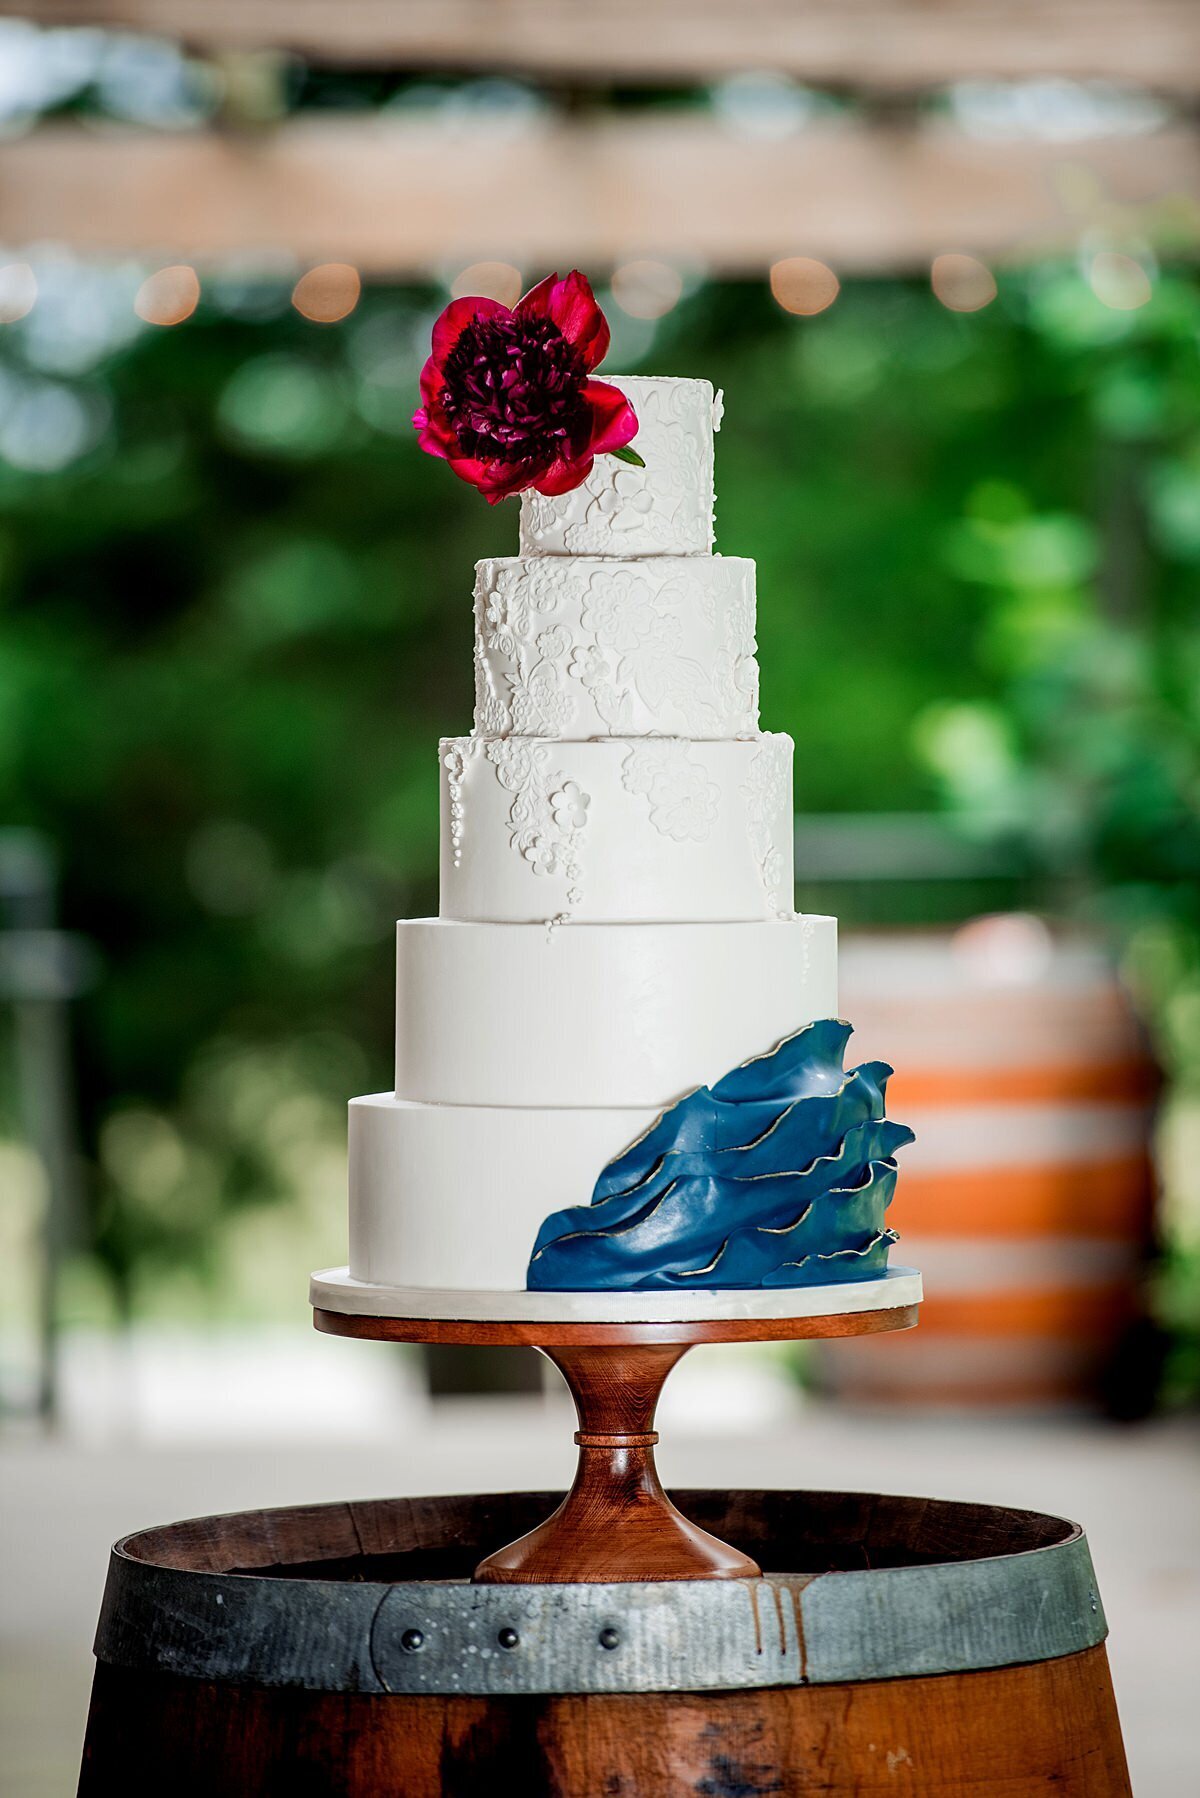 A five tier white wedding cake with hand piped lace texture to match the lace on the bodice of the wedding gown accented by teal ruffles made from hand molded chocolate and a large burgundy peony topper. The cake sits on a wooden footed cake stand on top of a wine barrel at Arrington Vineyards.